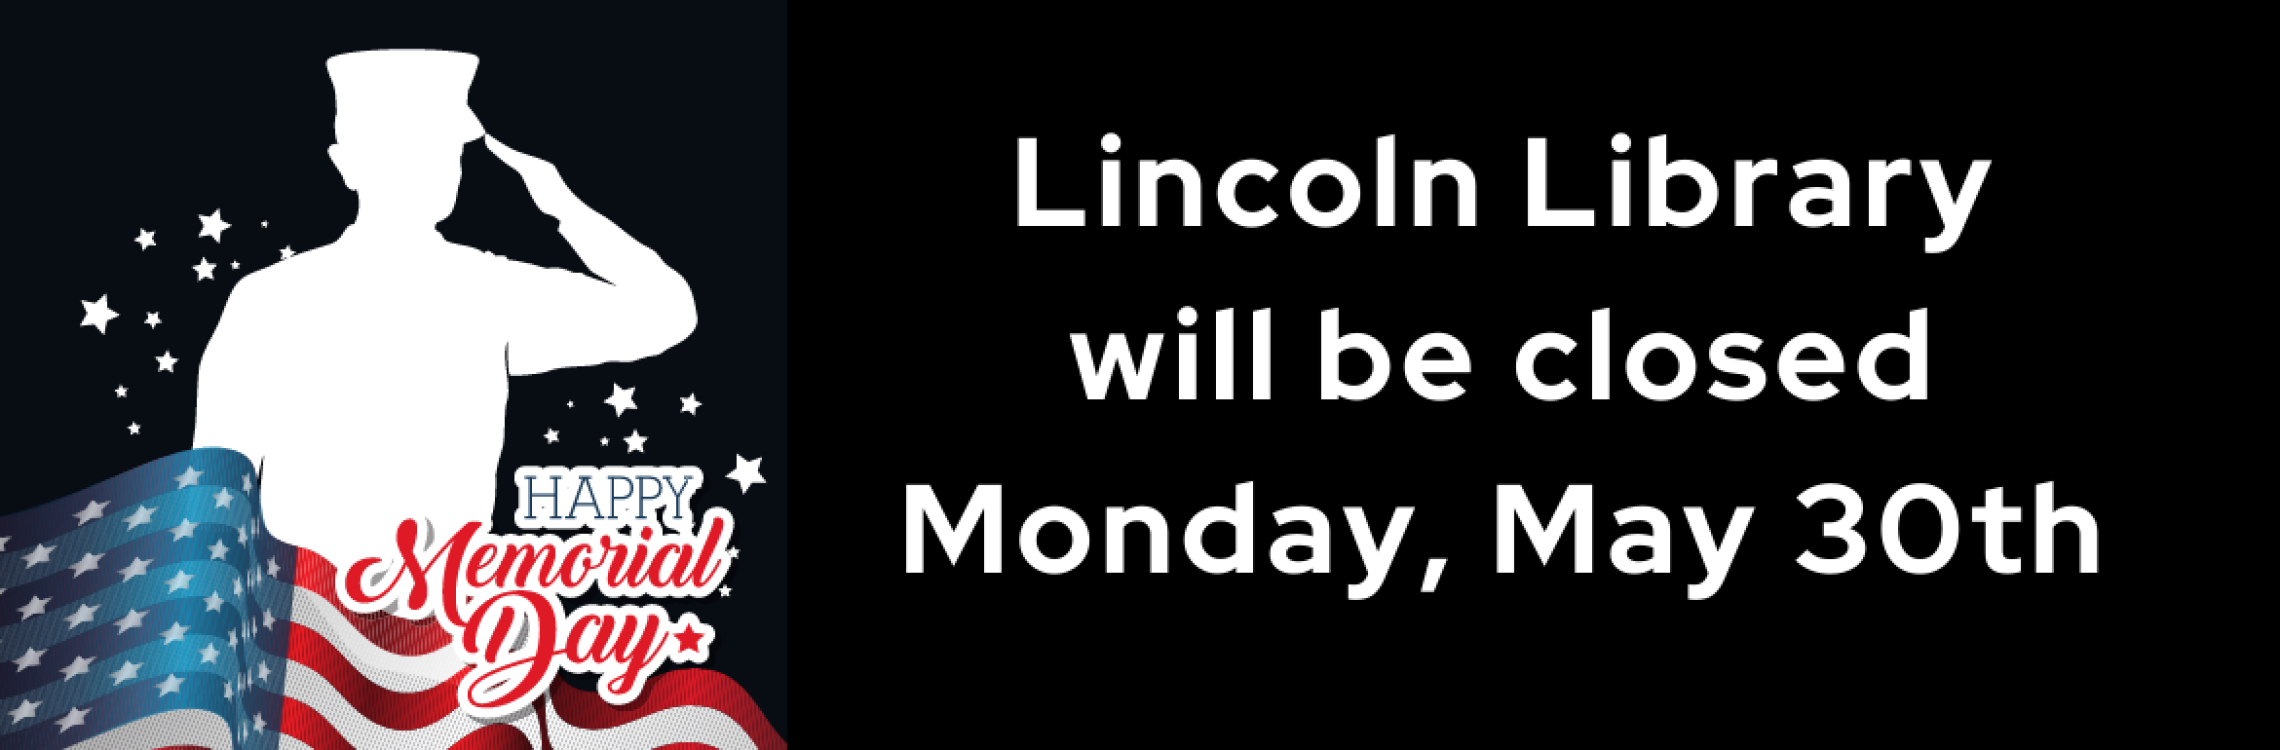 Lincoln Library will be closed Monday, May 30th for Memorial Day